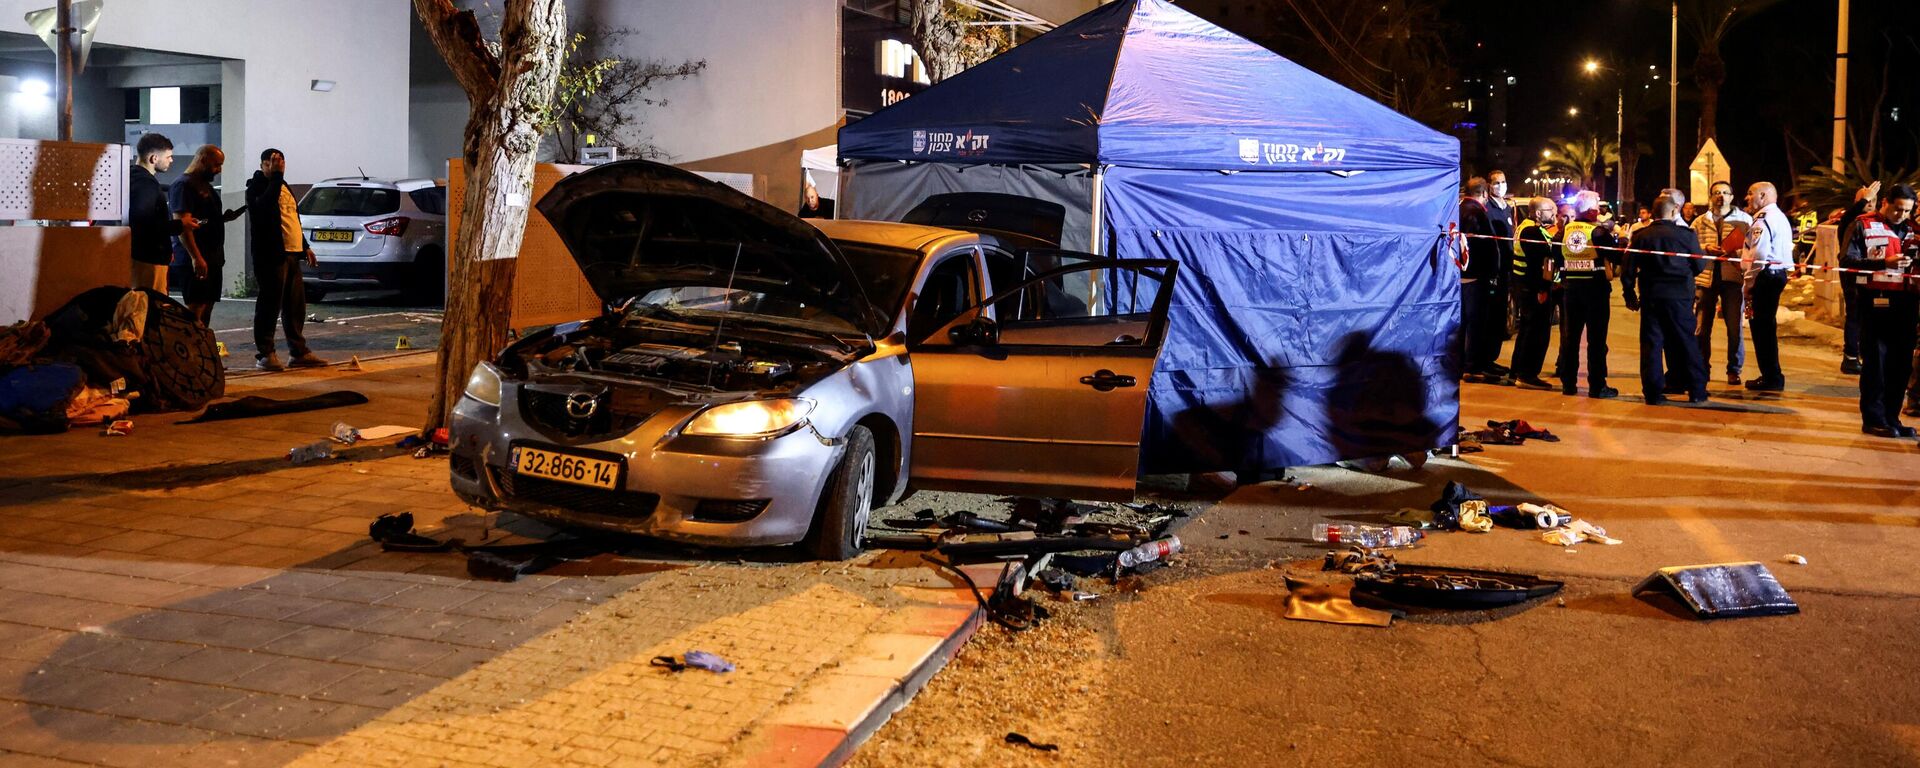 The wreckage of gunmens' car is seen following an attack in which people were killed on a main street in Hadera, Israel, March 27, 2022. REUTERS/Ronen Zvulun - Sputnik International, 1920, 28.03.2022